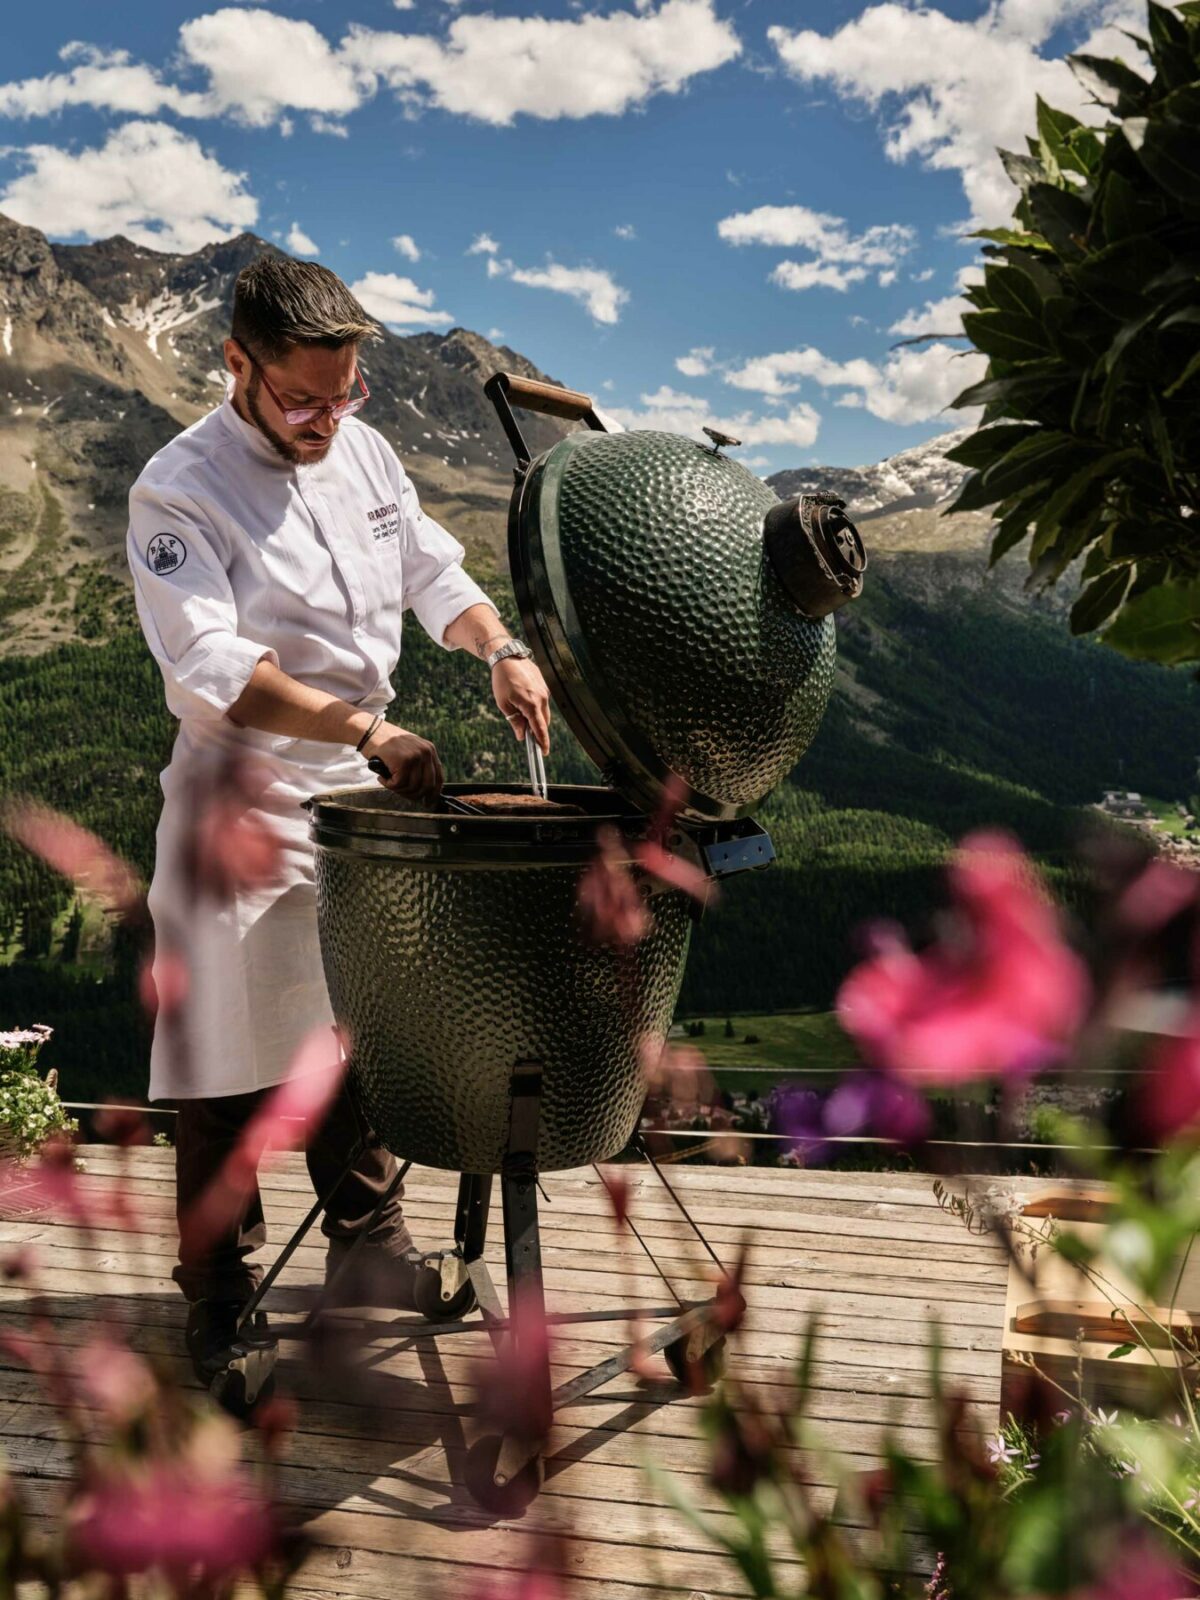 Chef barbecuing with mountains in the background